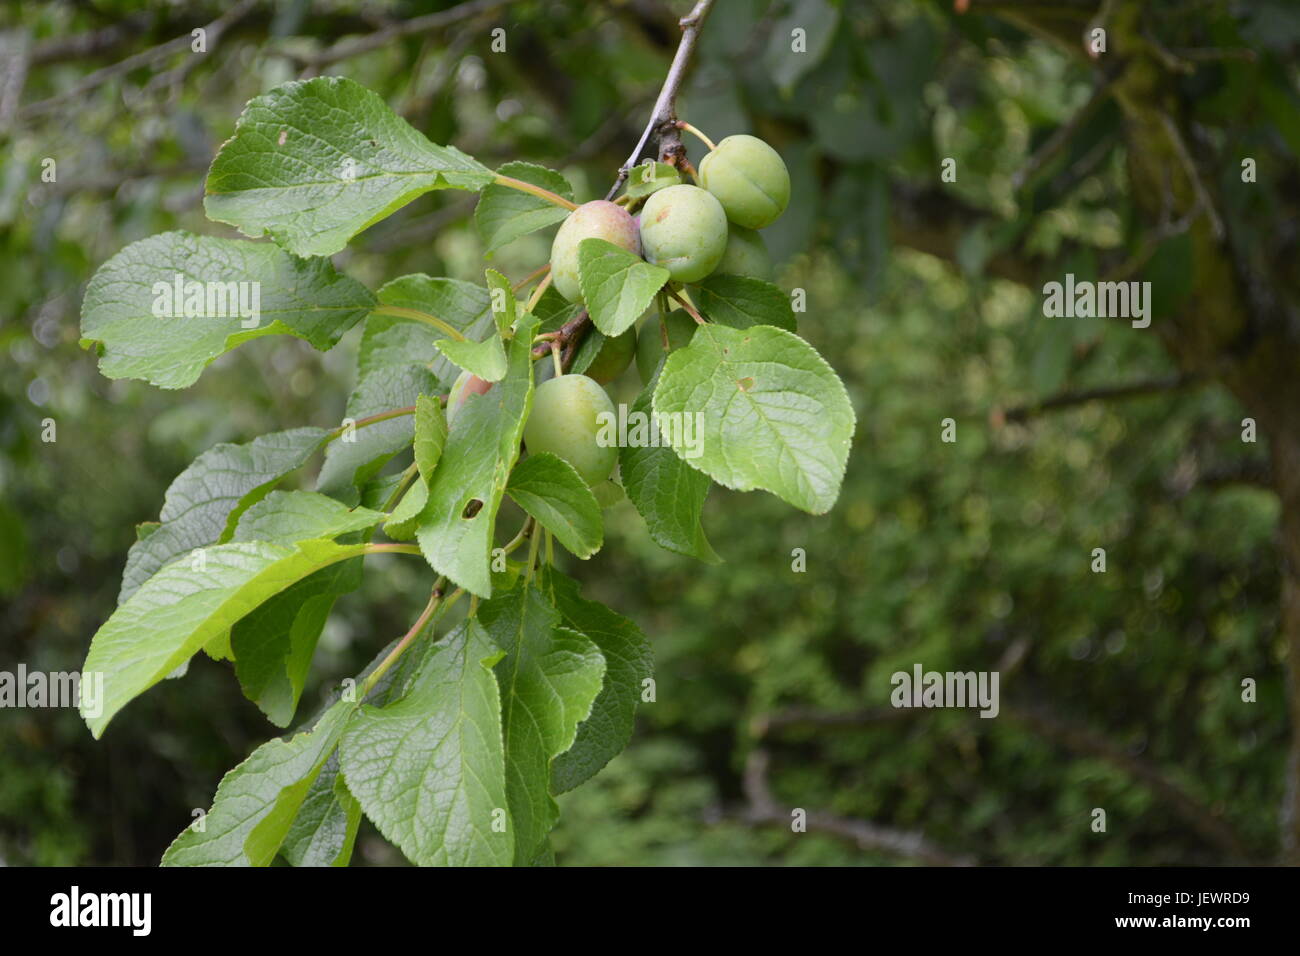 Victoria plums growing in a bunch on tree re fruit trees summer fruit common fruit English garden setting with out of focus trees and bushes England Stock Photo